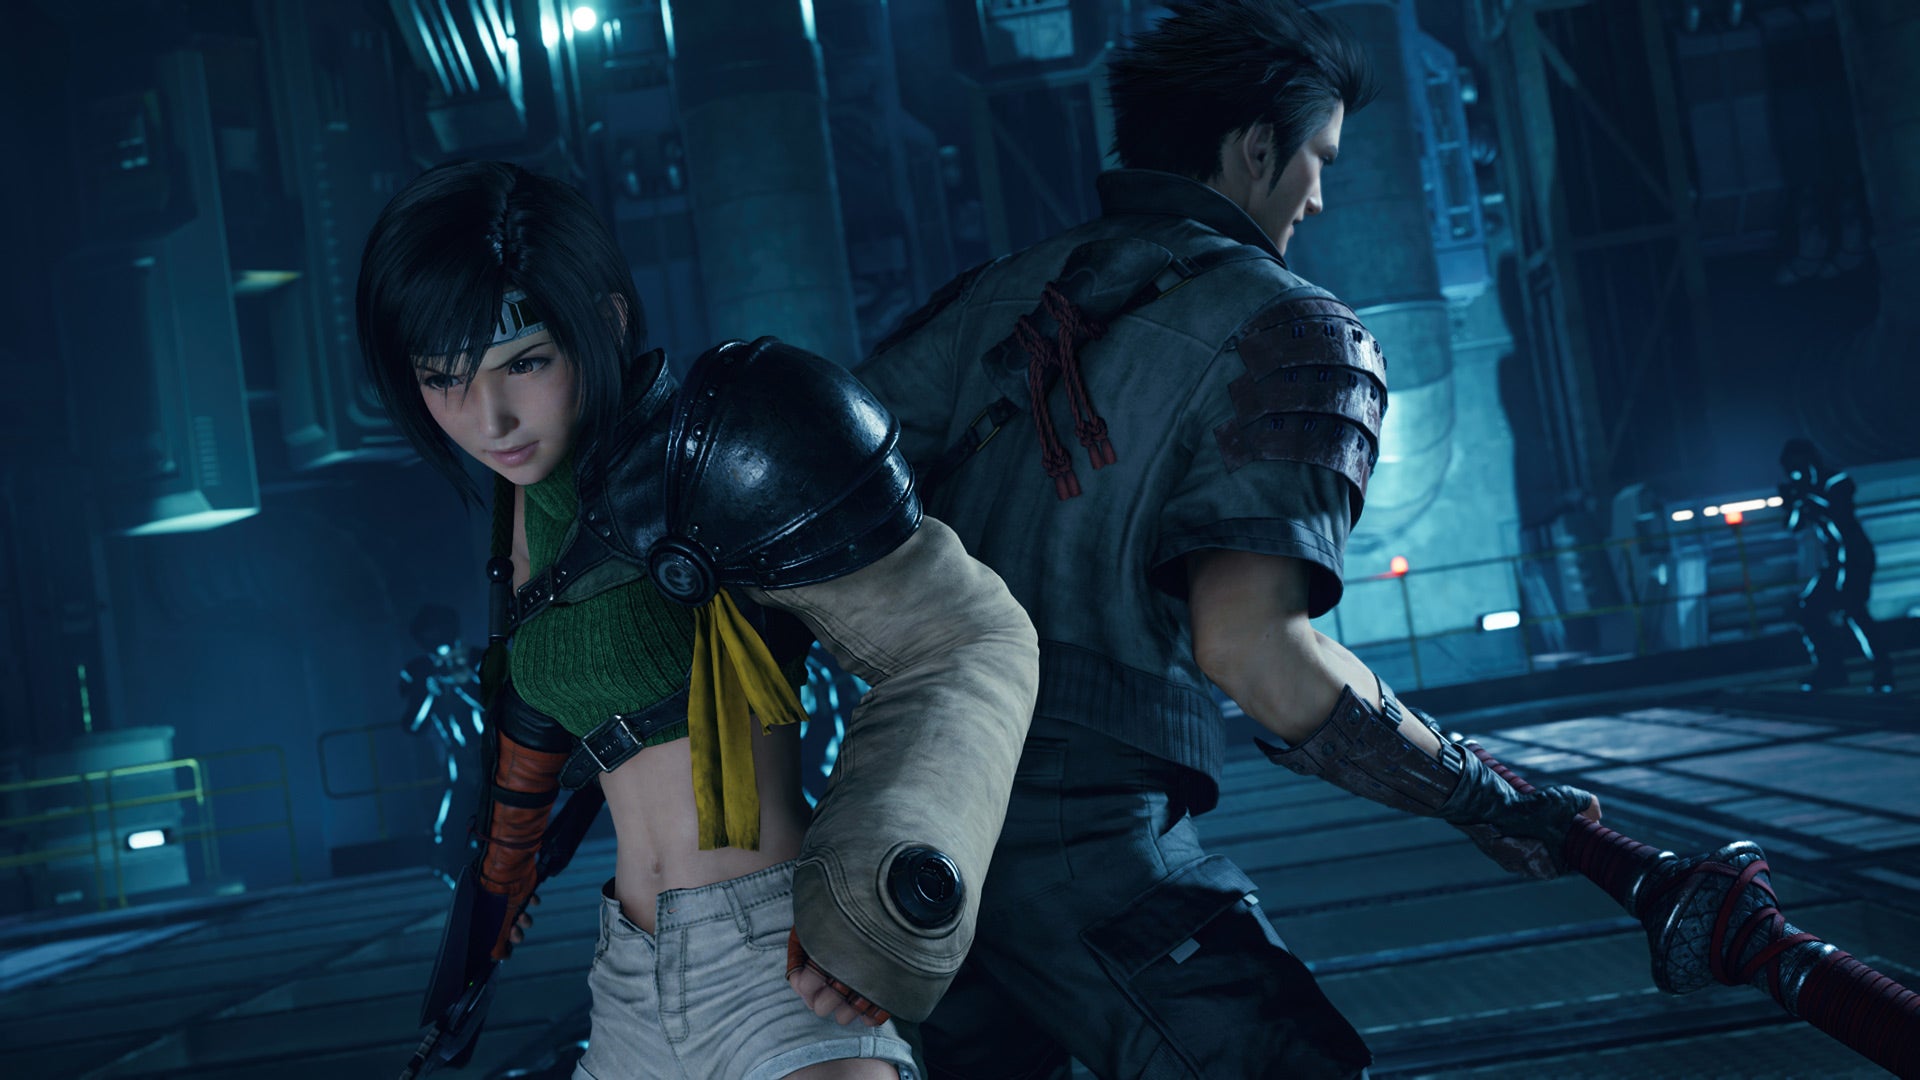 Yuffie and Sonon will play off each other's personalities. (Image: Square Enix)